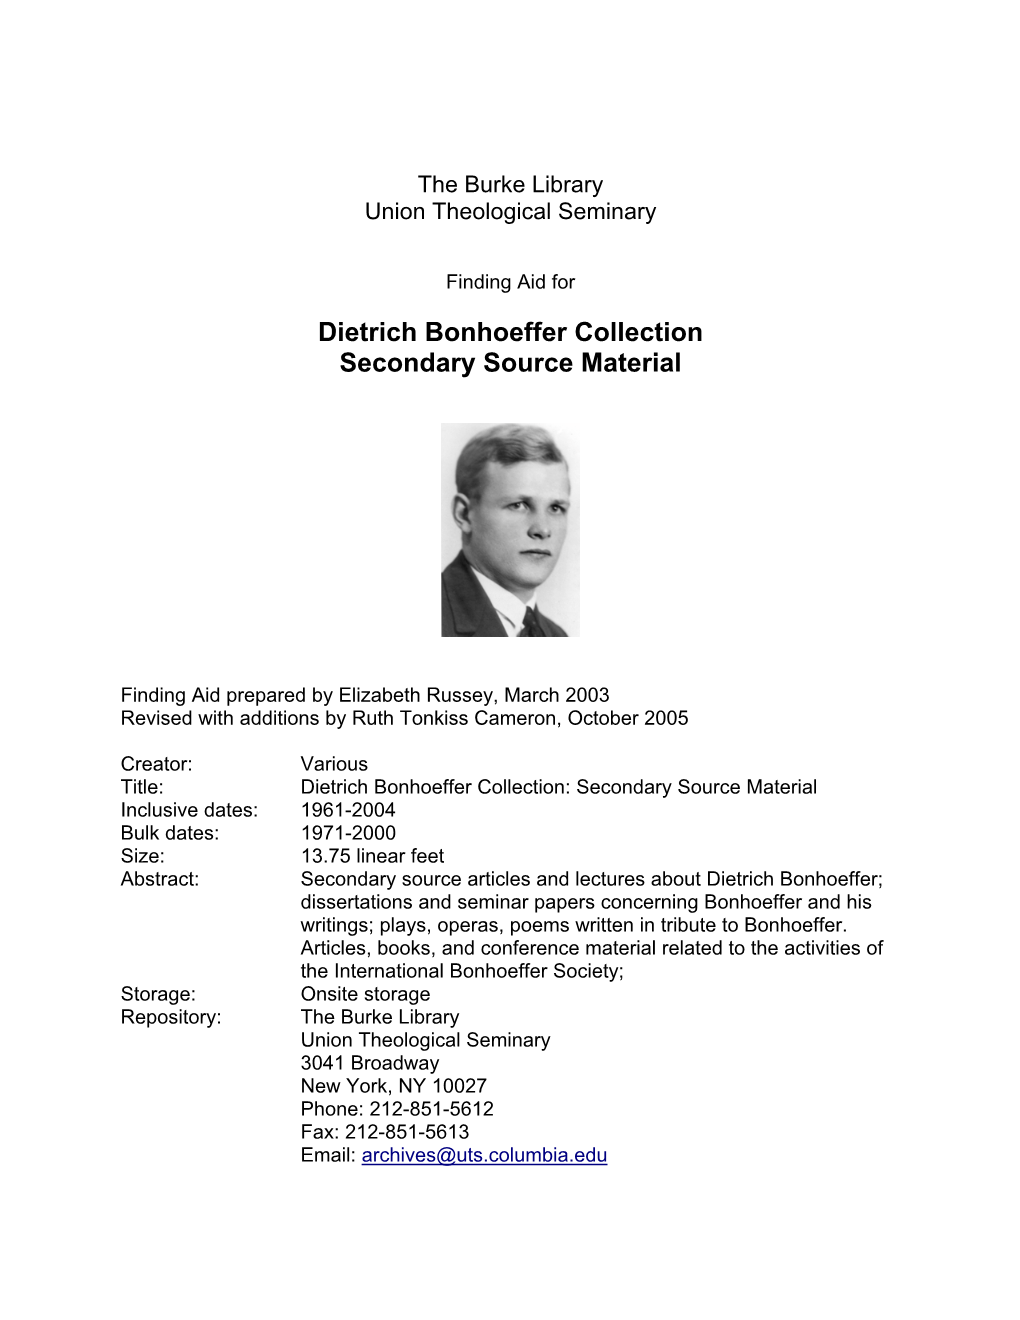 Dietrich Bonhoeffer Collection Secondary Source Material